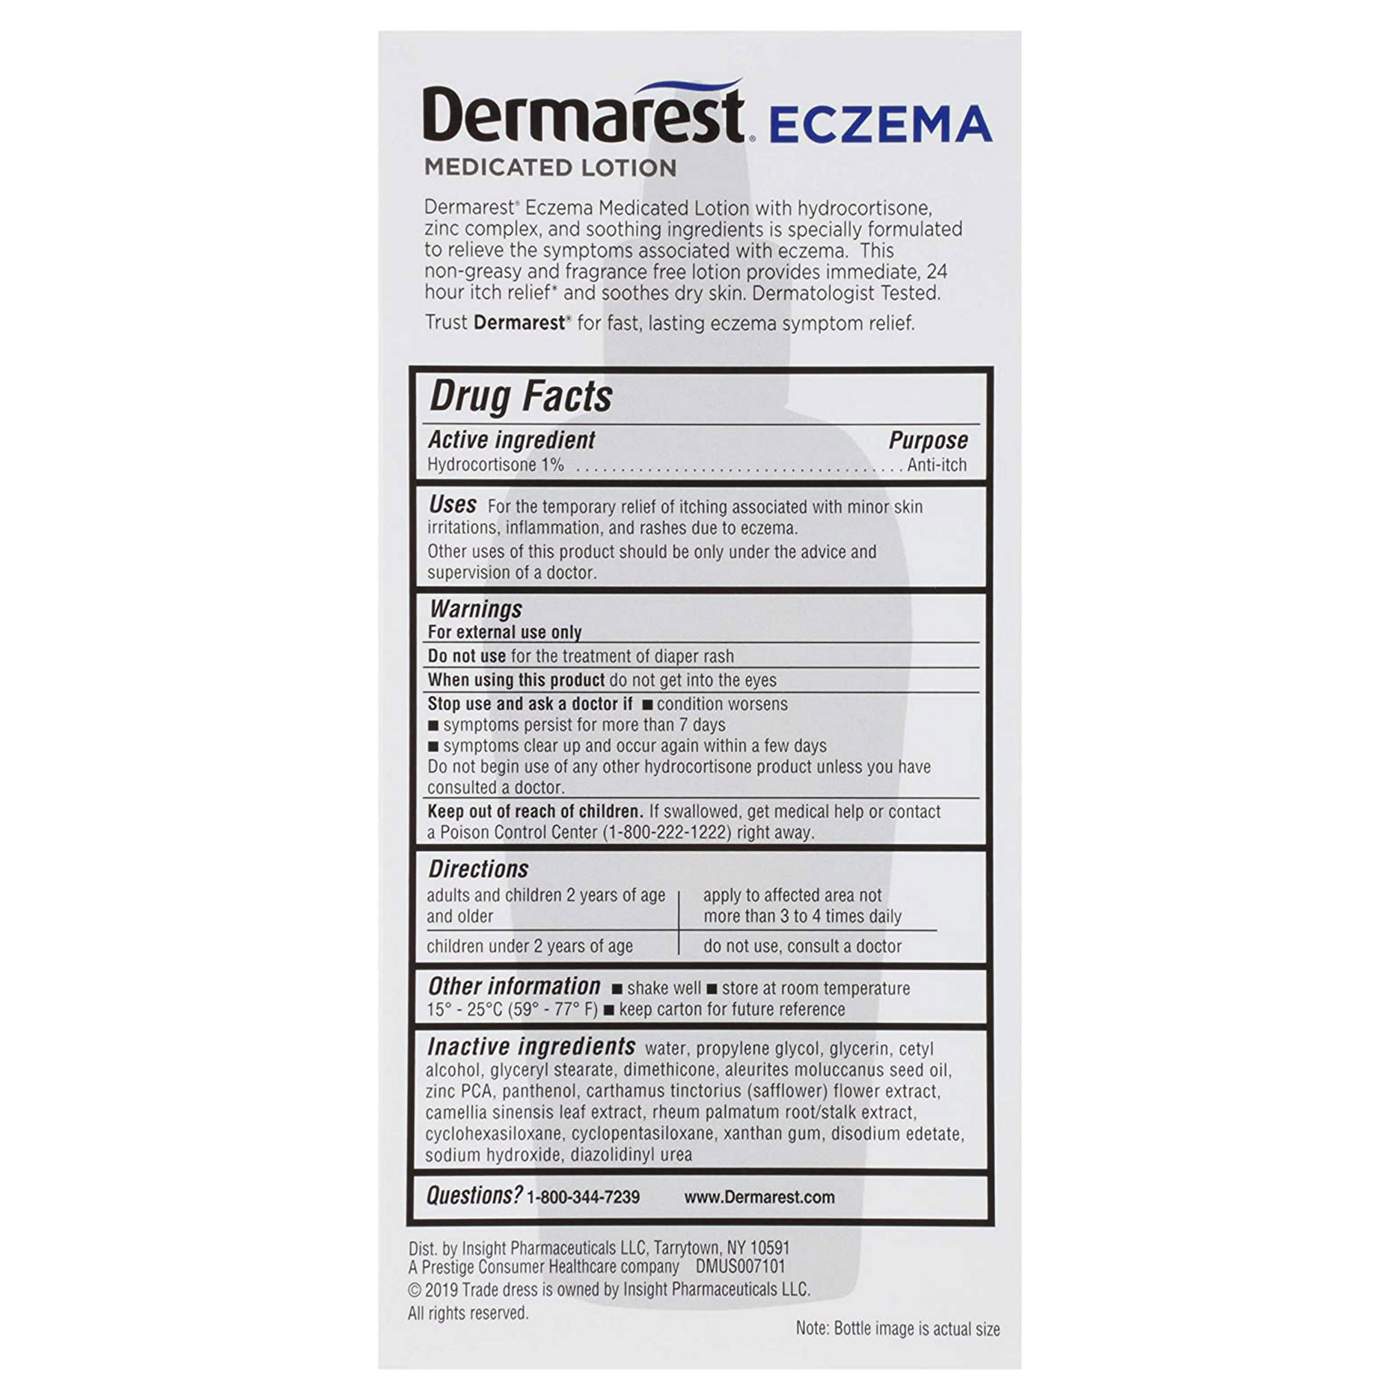 Dermarest Eczema Medicated Lotion; image 2 of 5